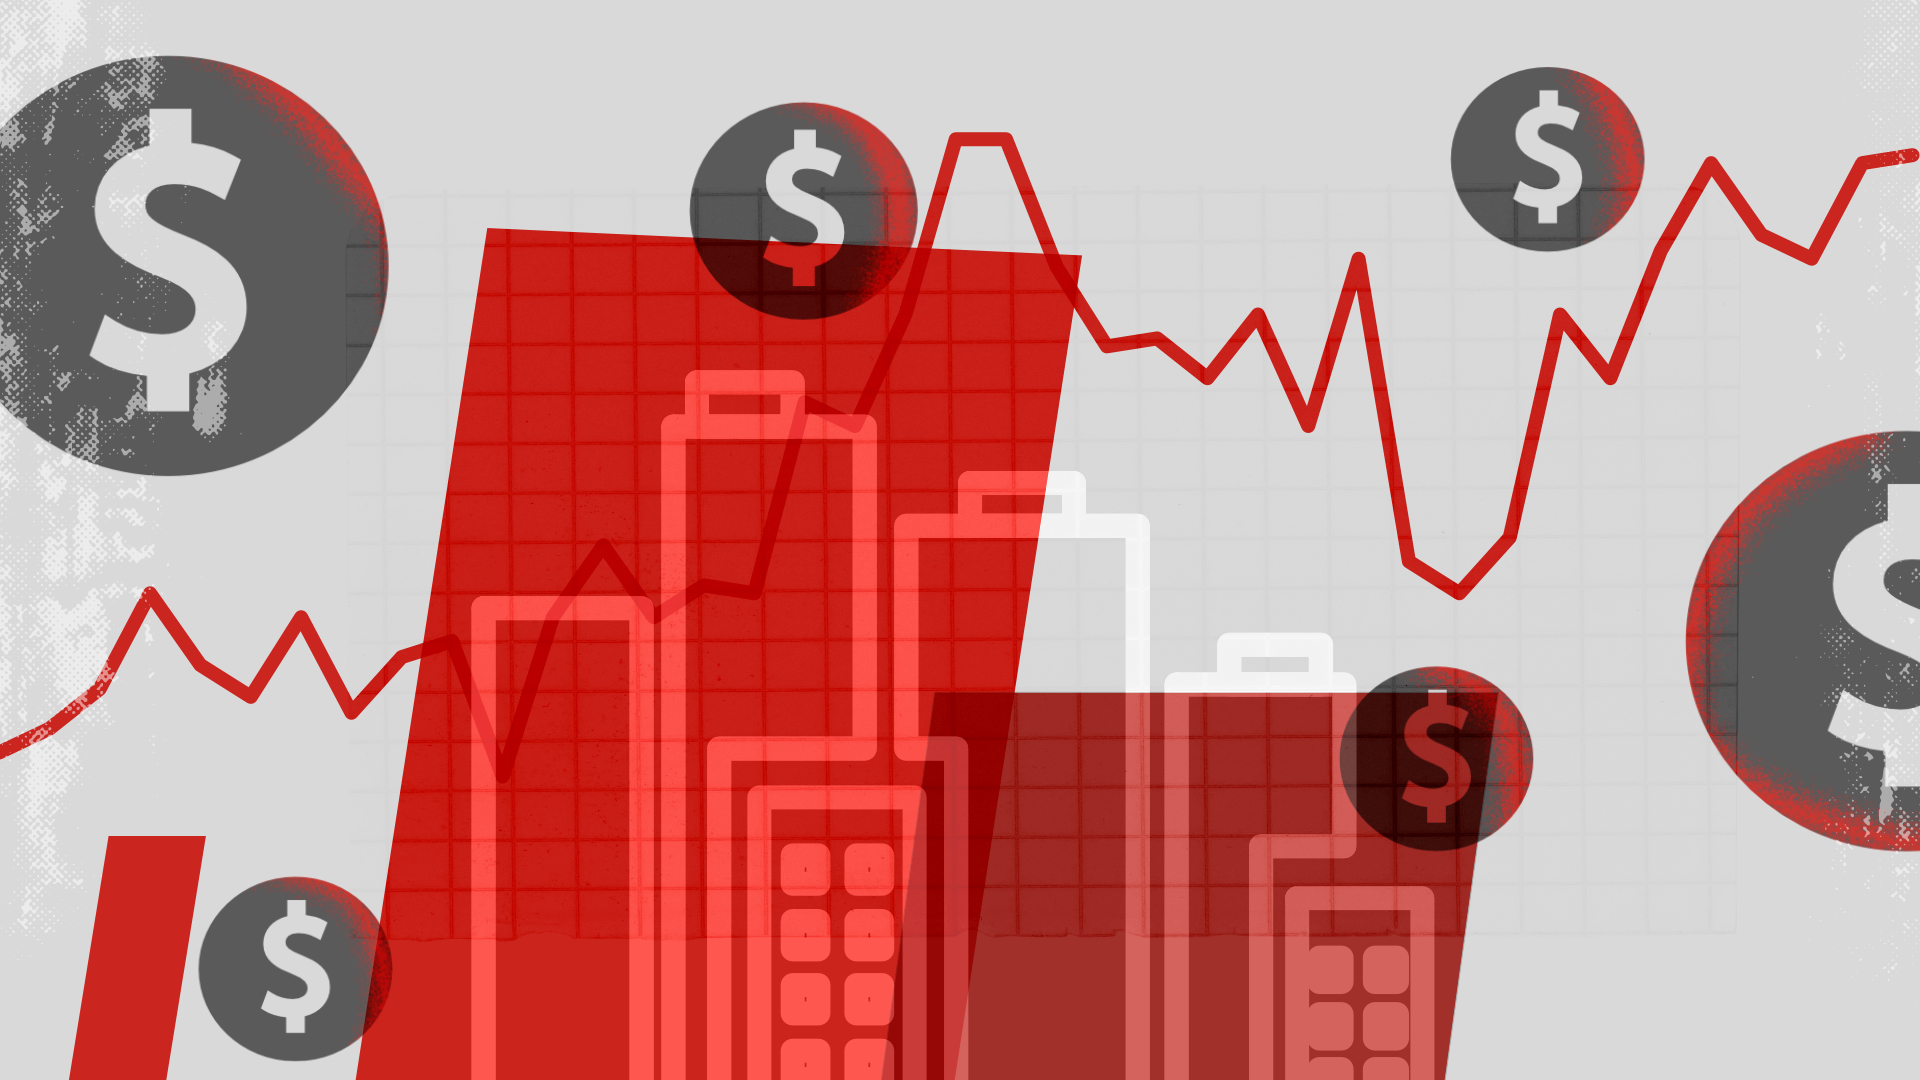 An illustration depicting dollar signs and a city skyline.